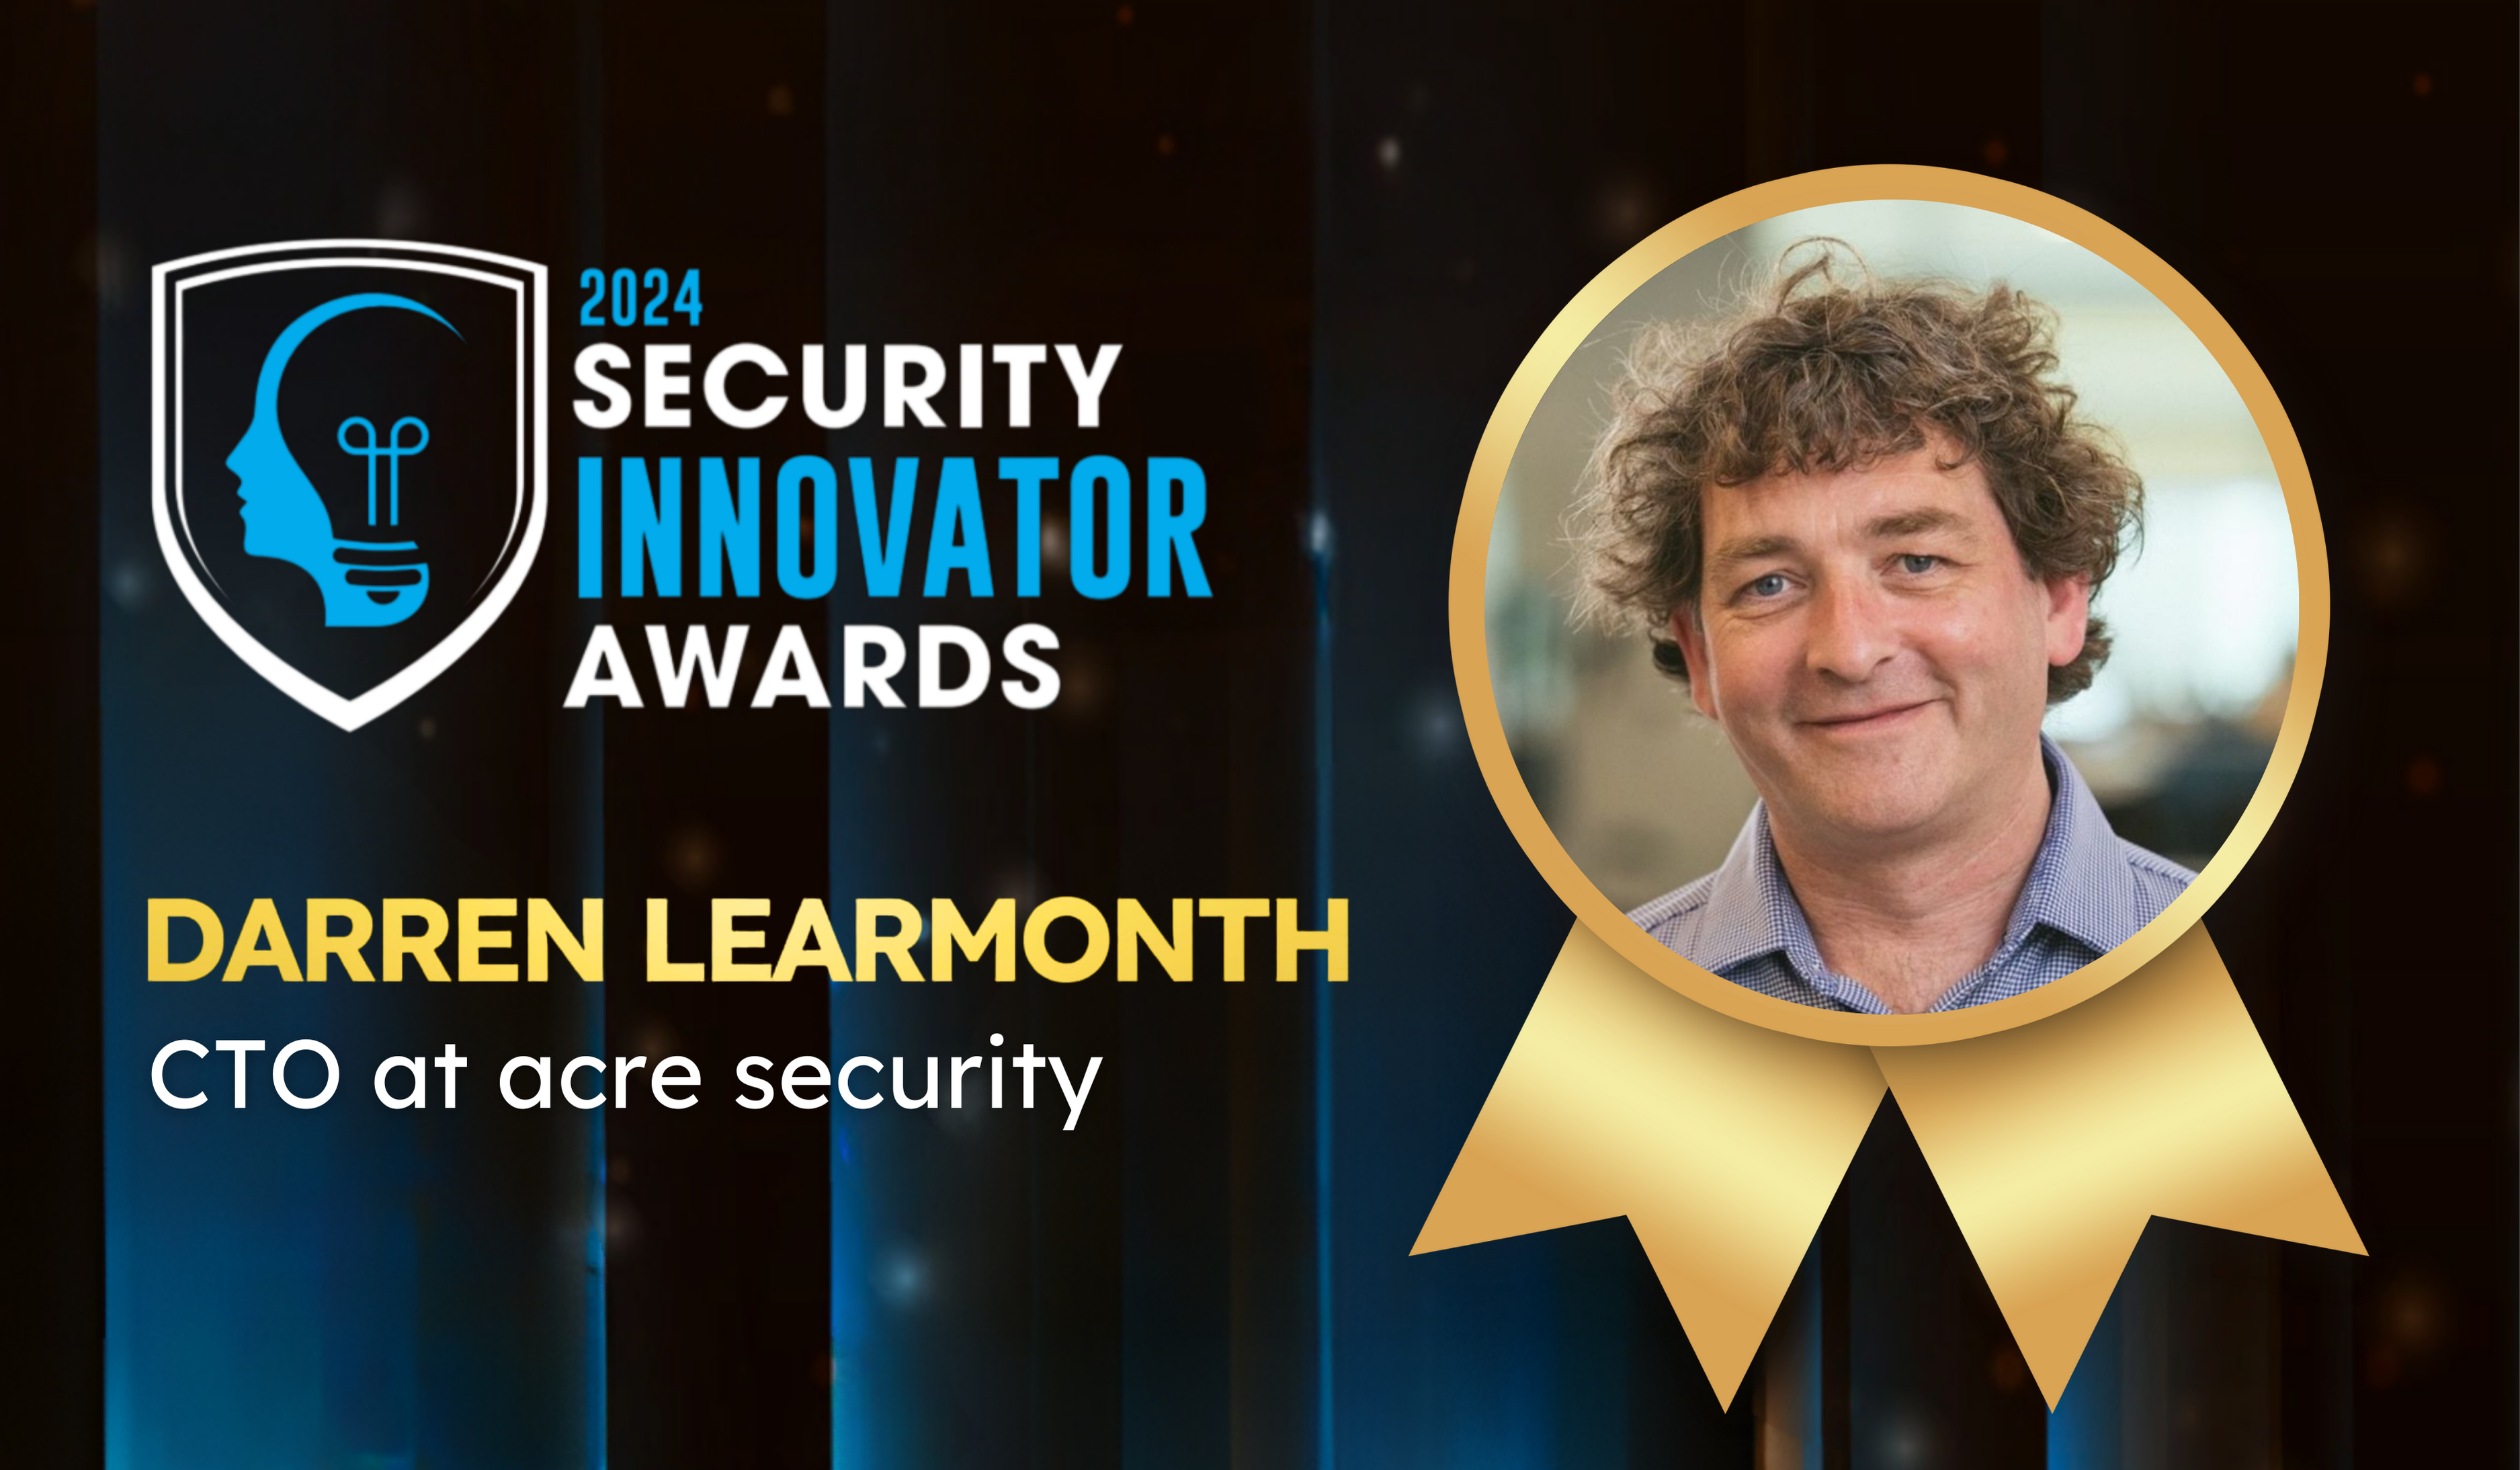 Darren Learmonth, CTO acre security, wins 2024 Security Innovation Awards